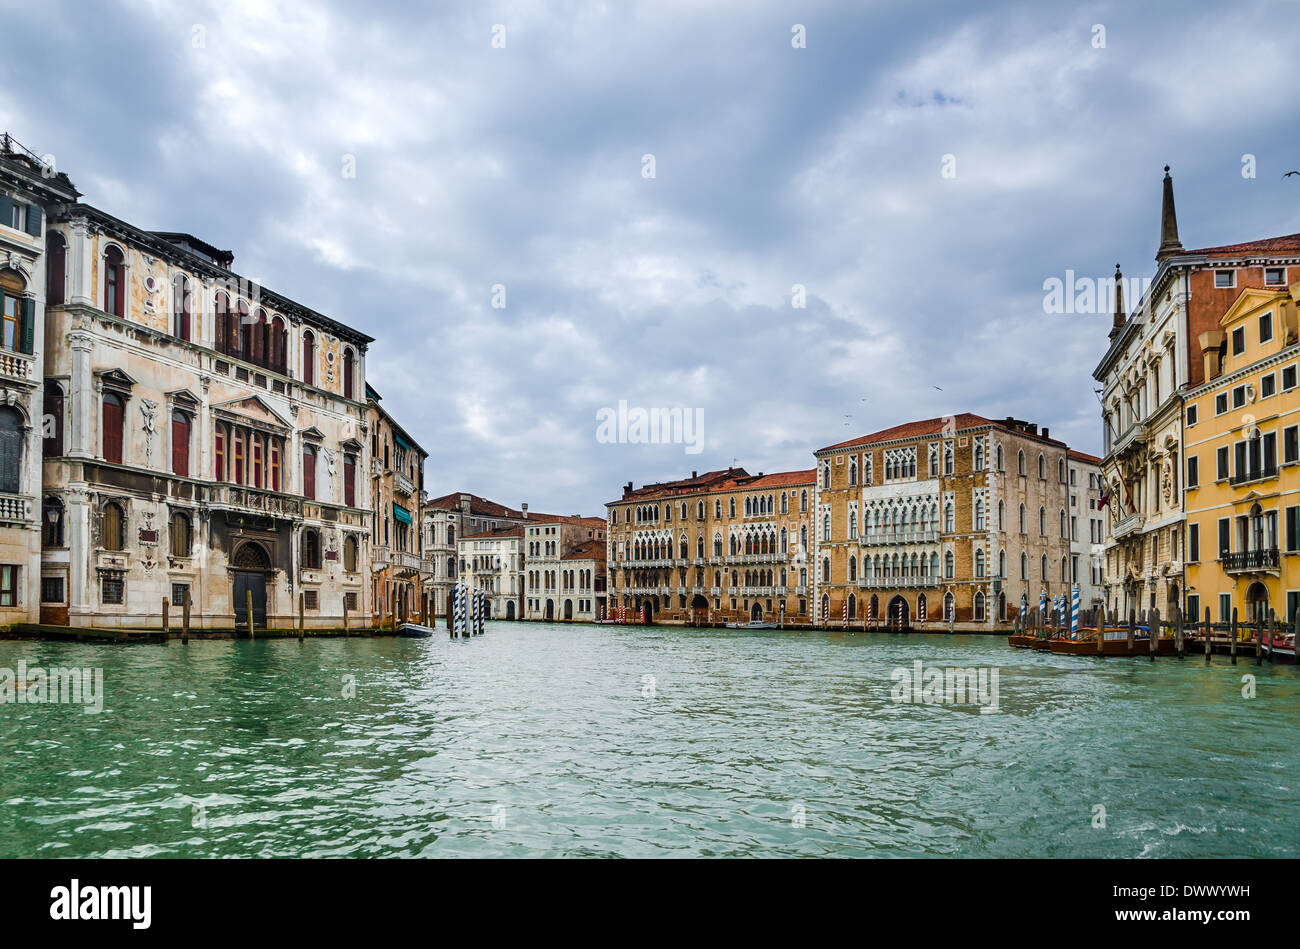 Venice, Italy. Grand Canal or Canal Grande, orms one of the major water-traffic corridors in the city. Landmark of Venice laguna Stock Photo